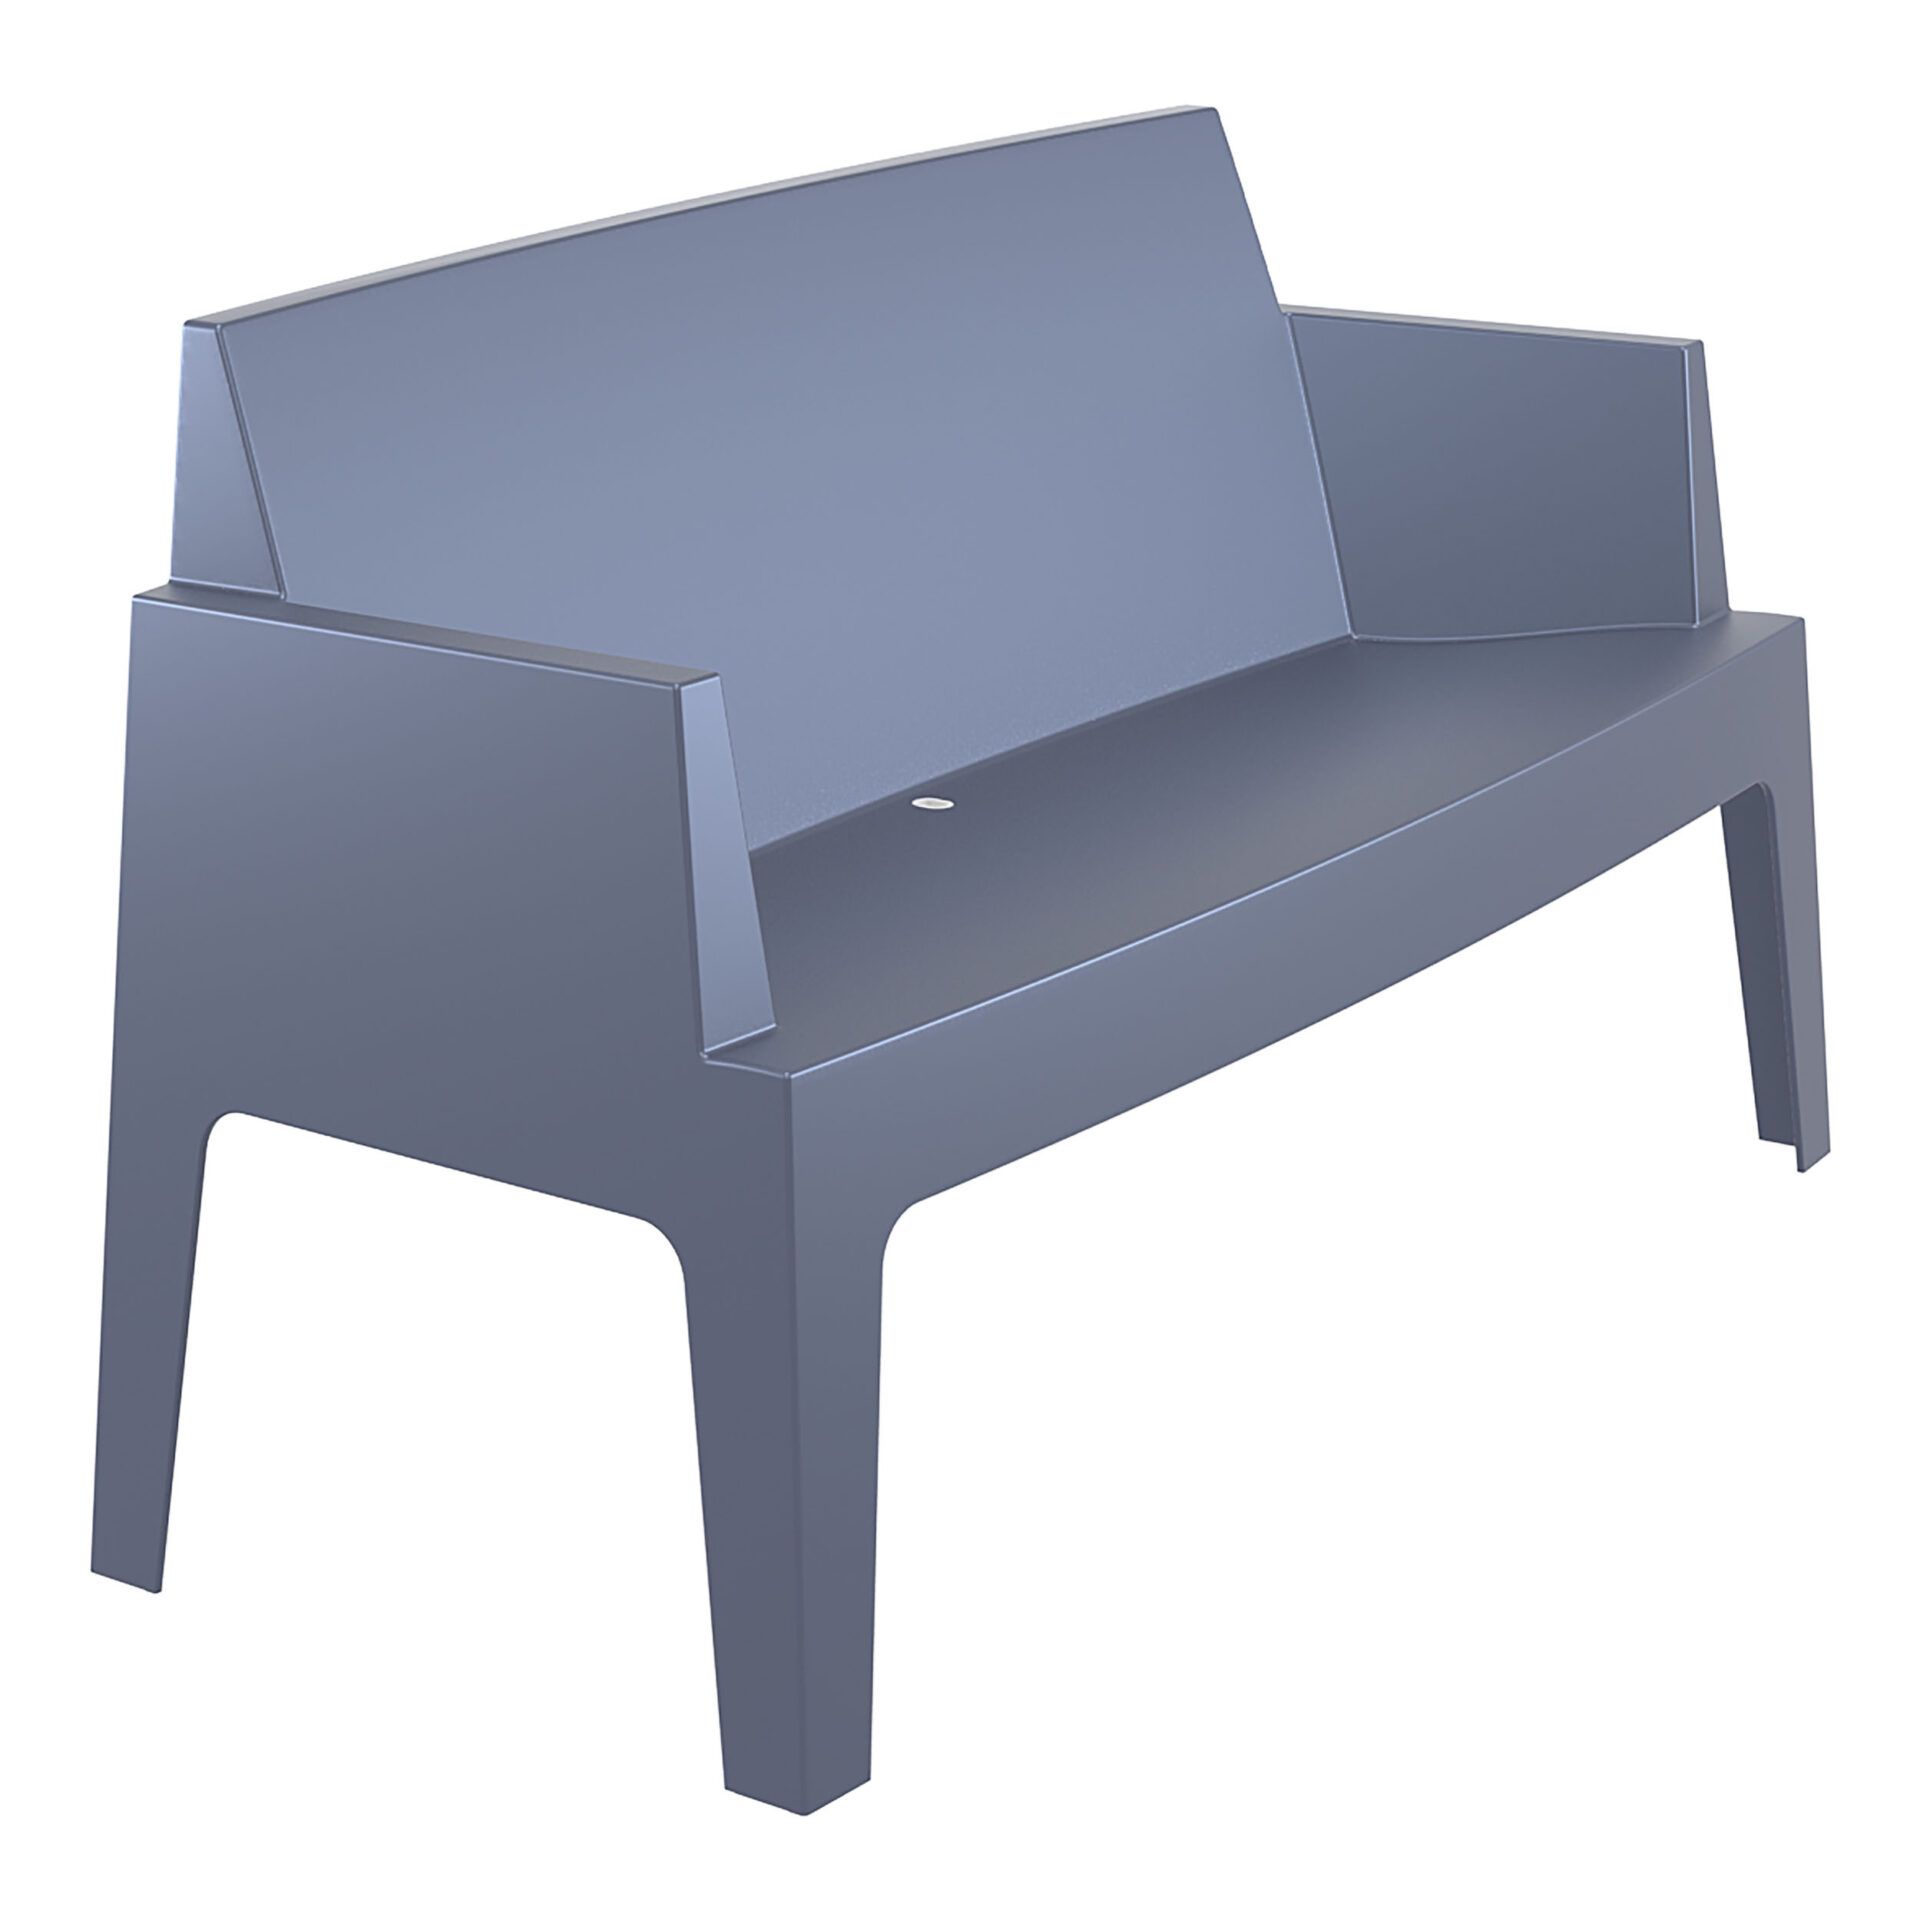 Box Outdoor Lounge colour ANTHRACITE available to order now!